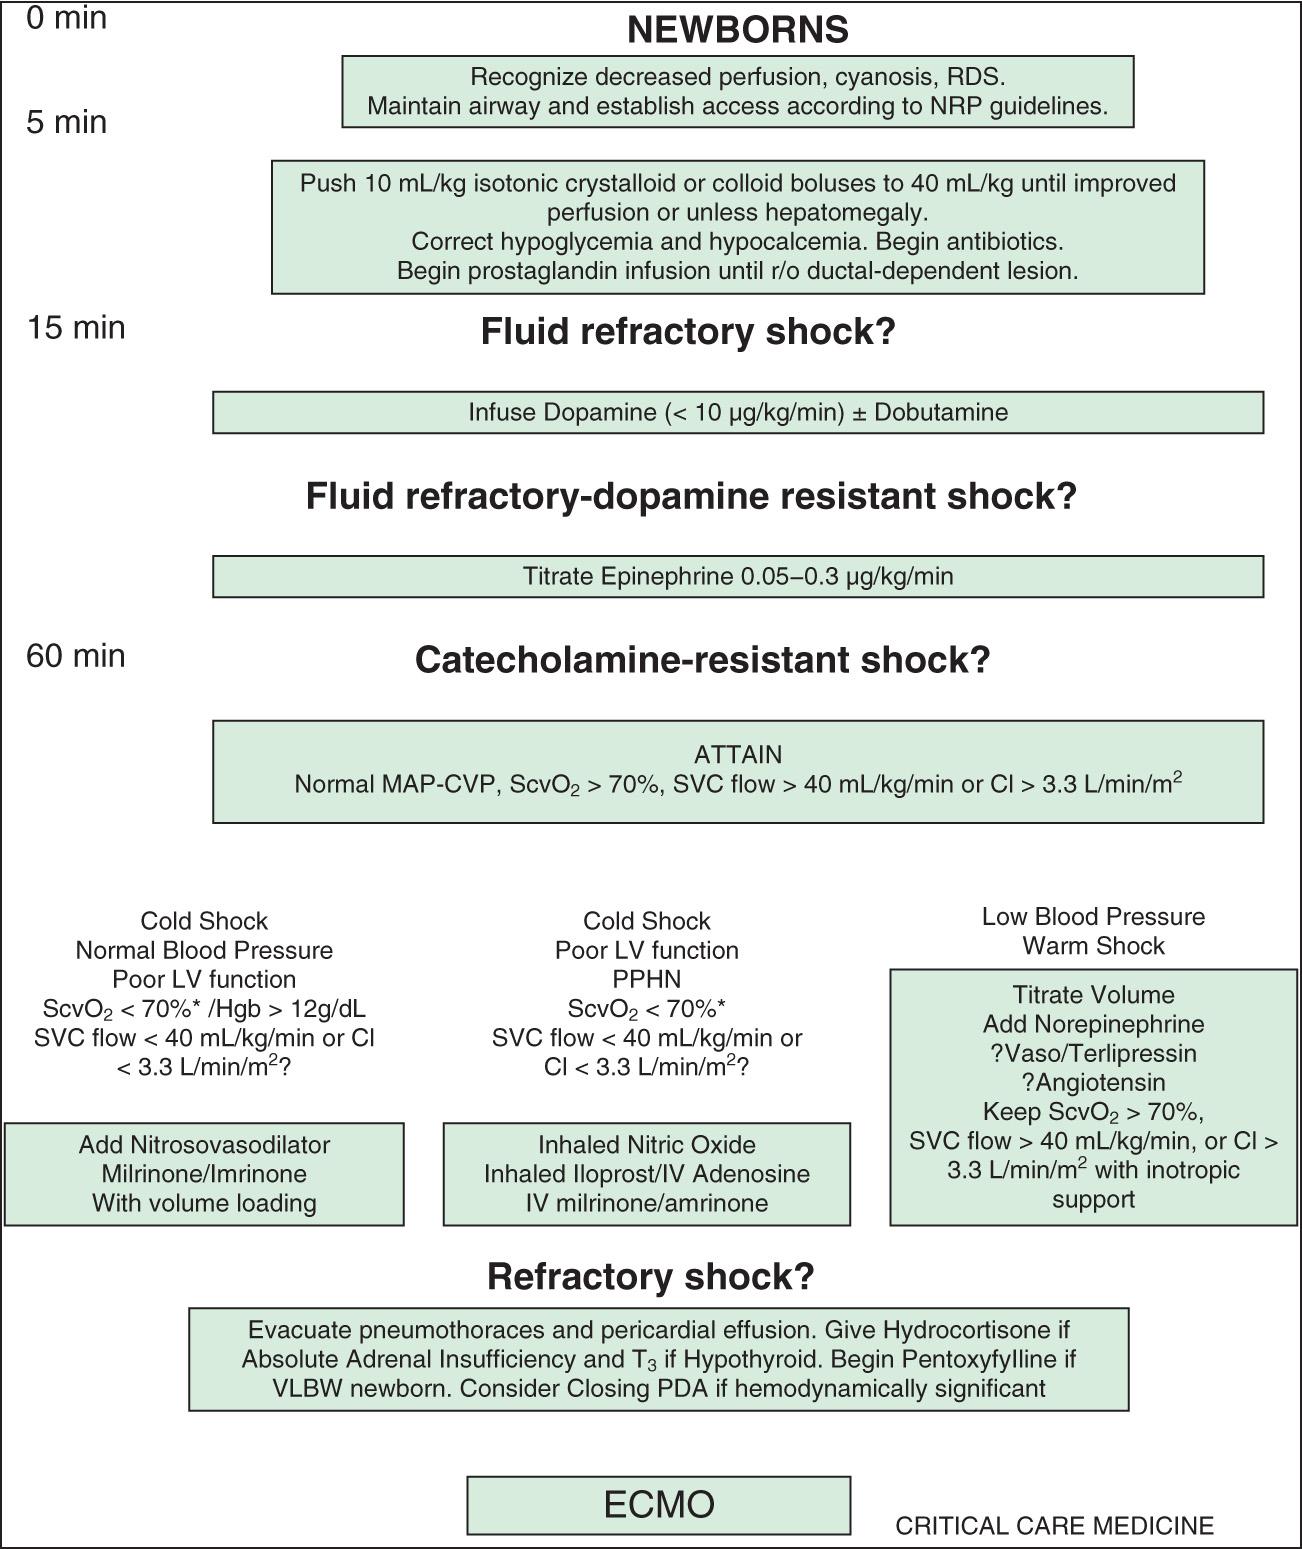 Fig. 88.1, American College of Critical Care Medicine algorithm for time-sensitive, goal-directed stepwise management of hemodynamic support in newborns .